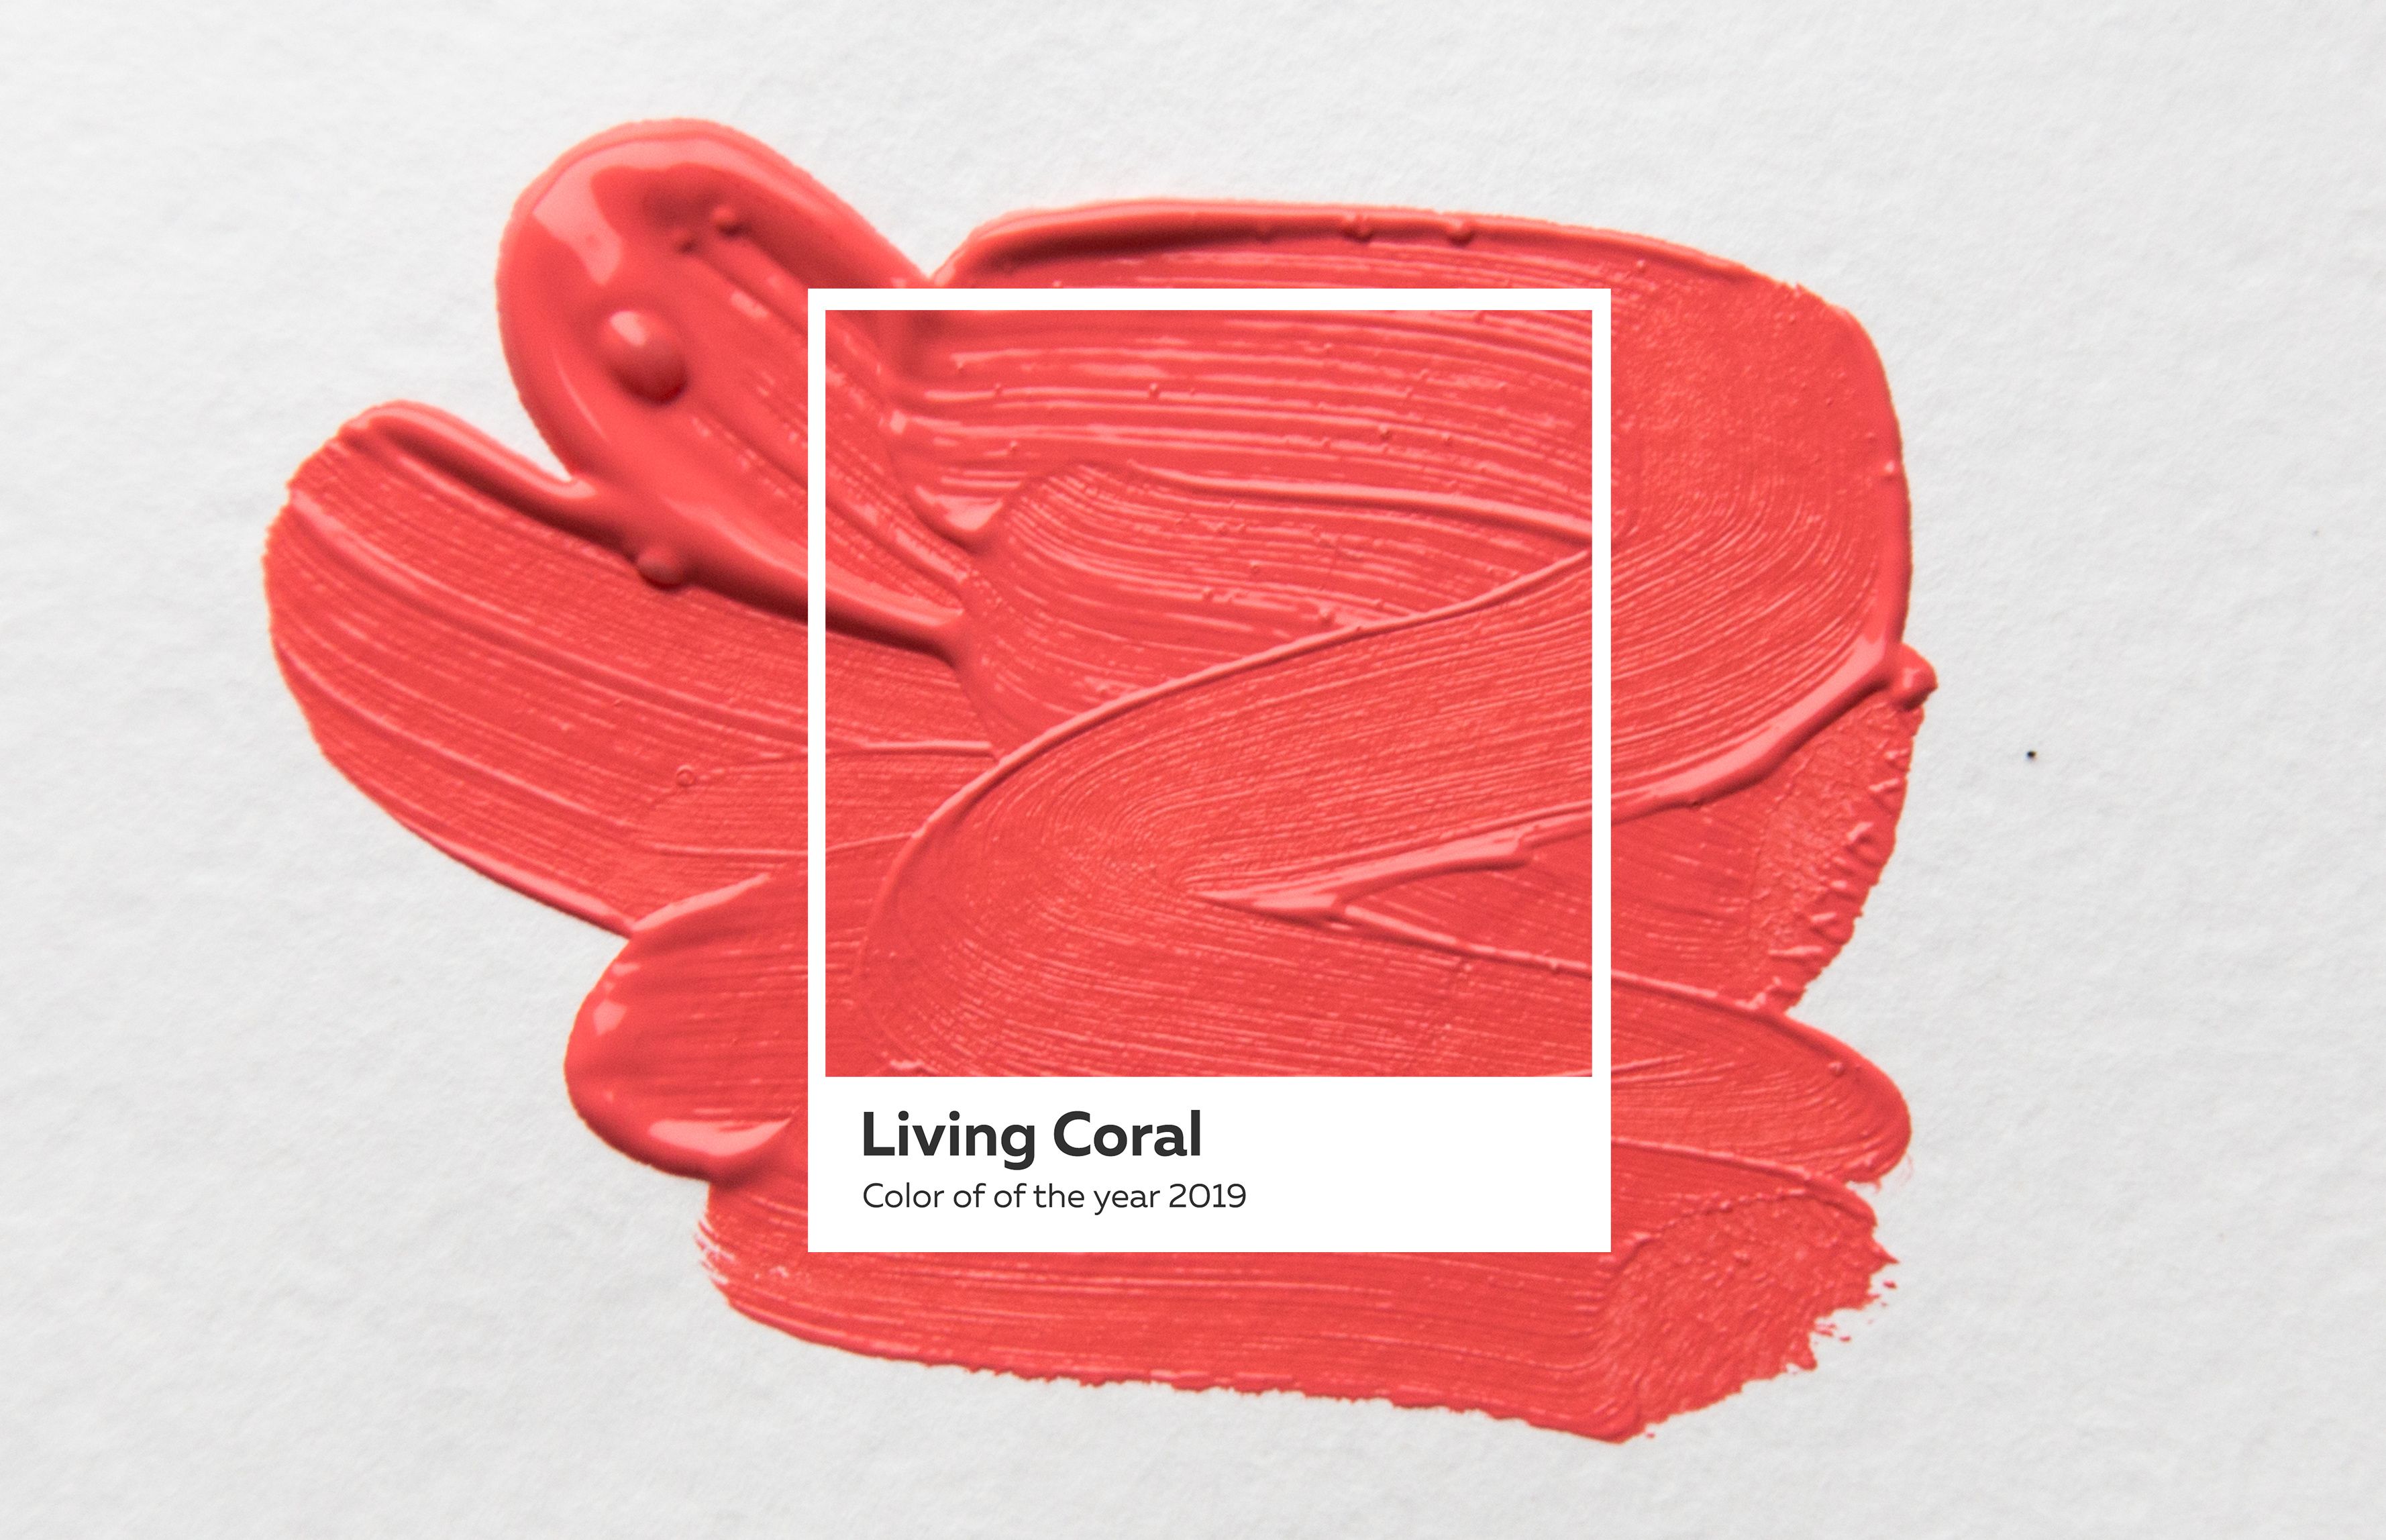 The Pantone Colour of the Year: Living Coral